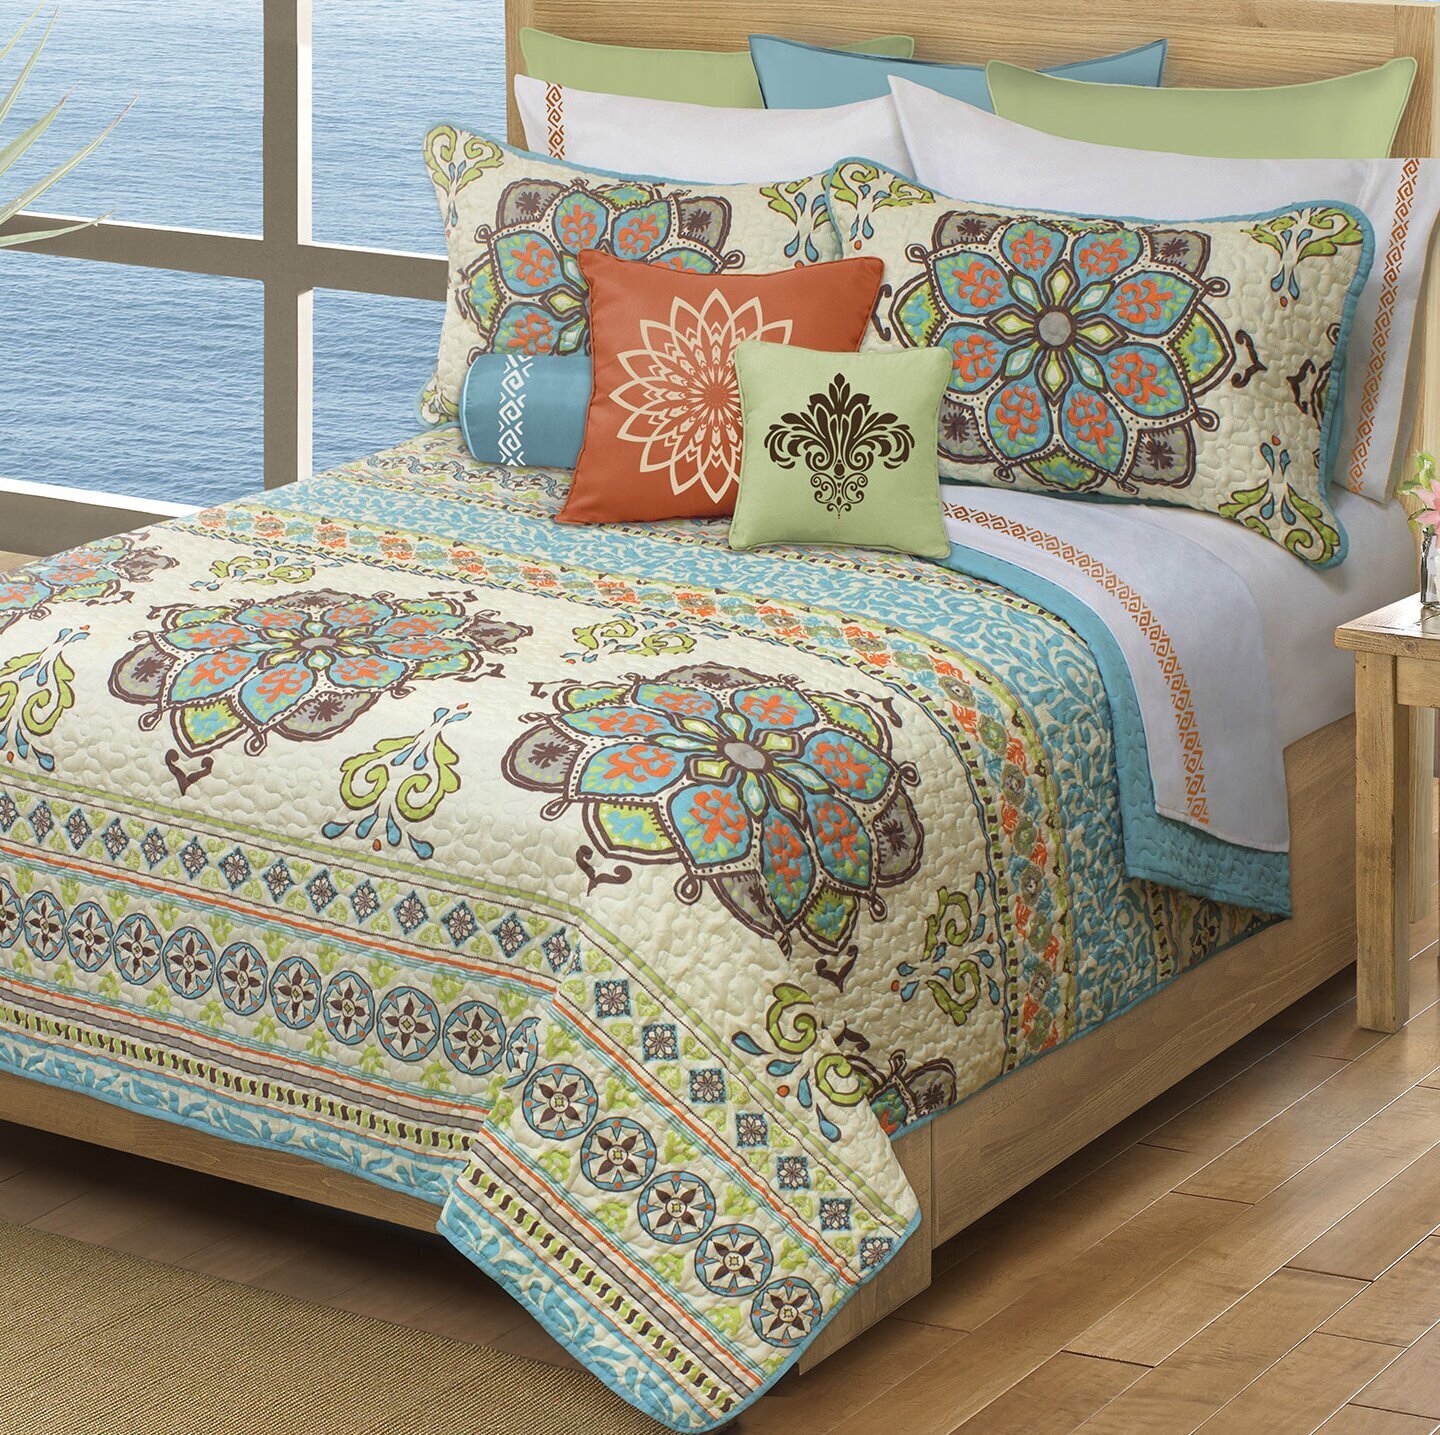 Earthy Pastel Patterned Hippie Quilt